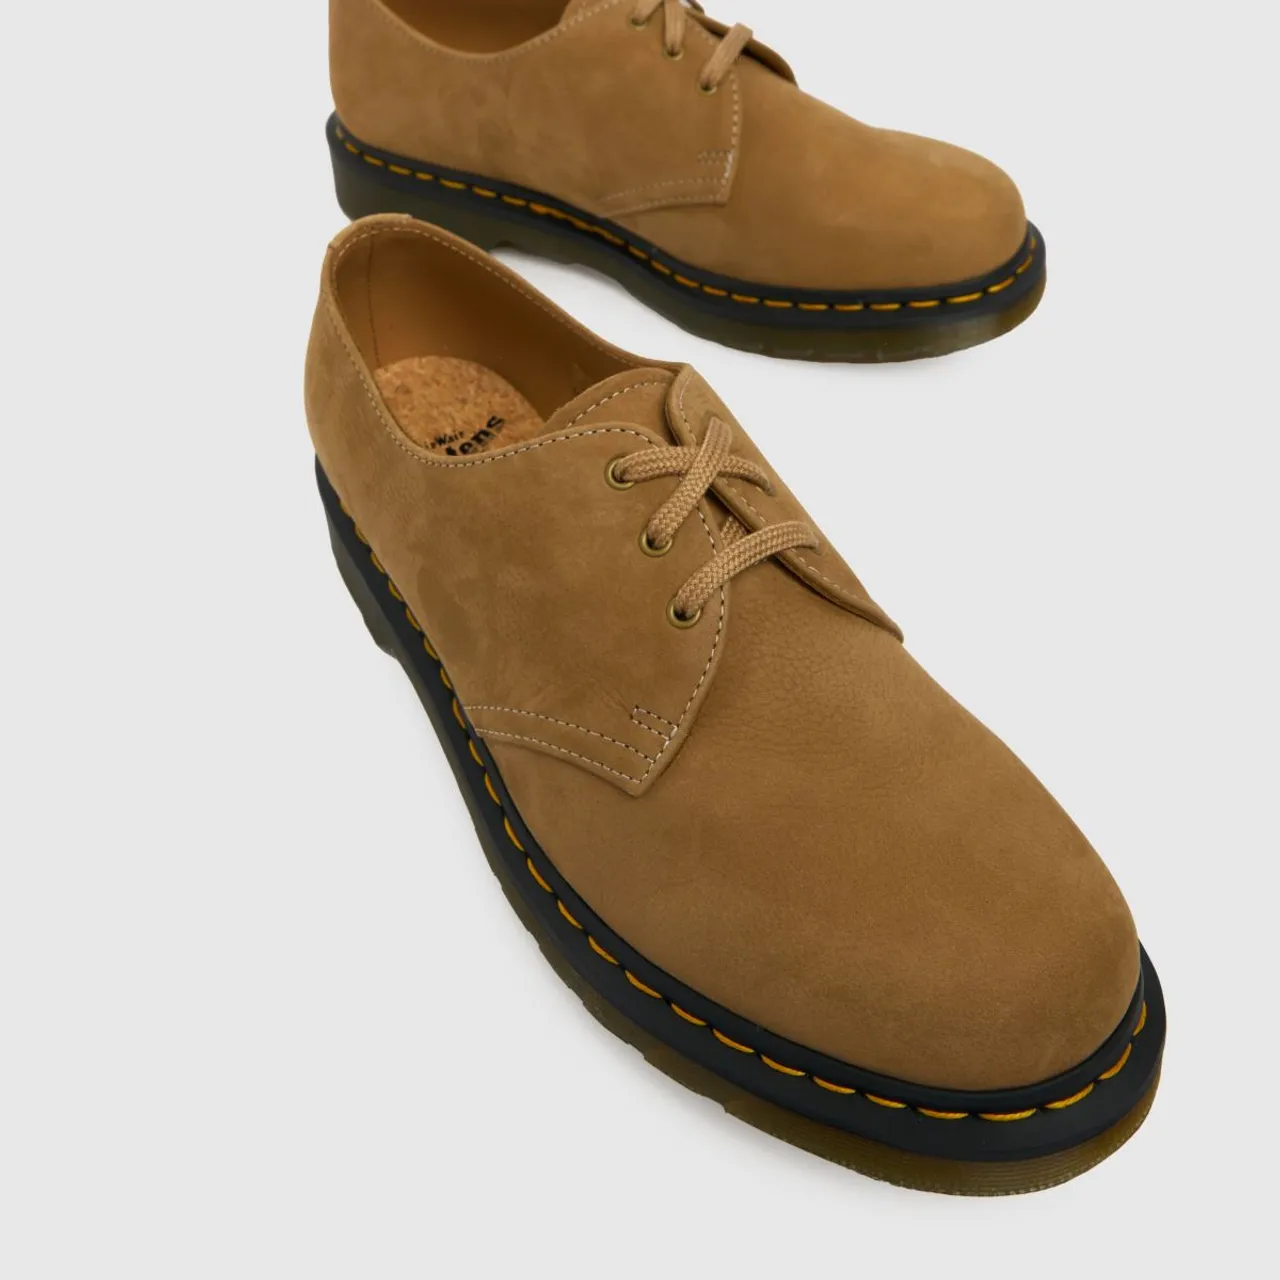 Dr Martens 1461 Shoes In Tan